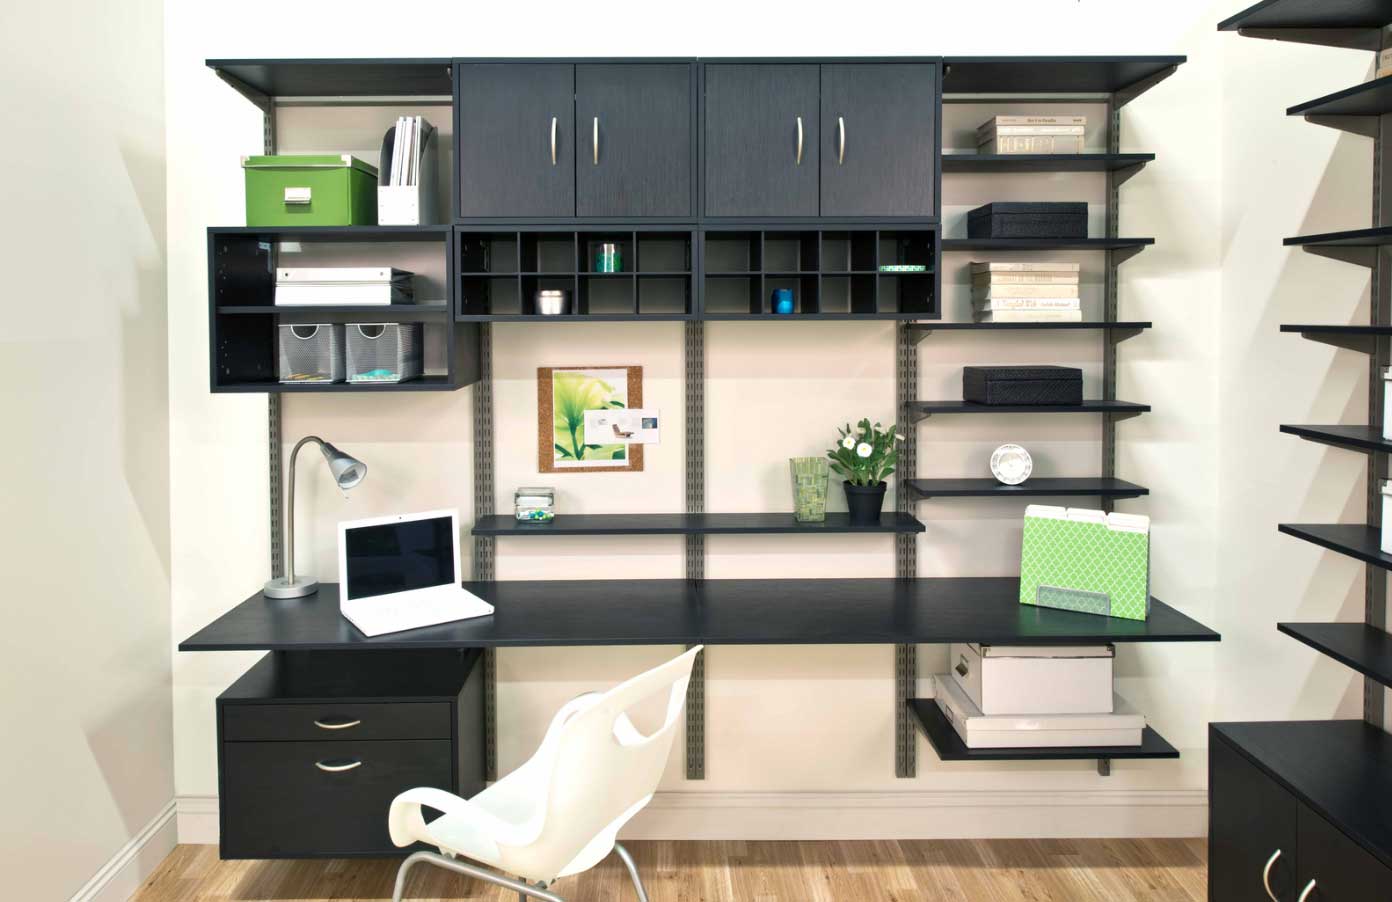 Home Office Shelving Solutions With Adjustable Design With Black